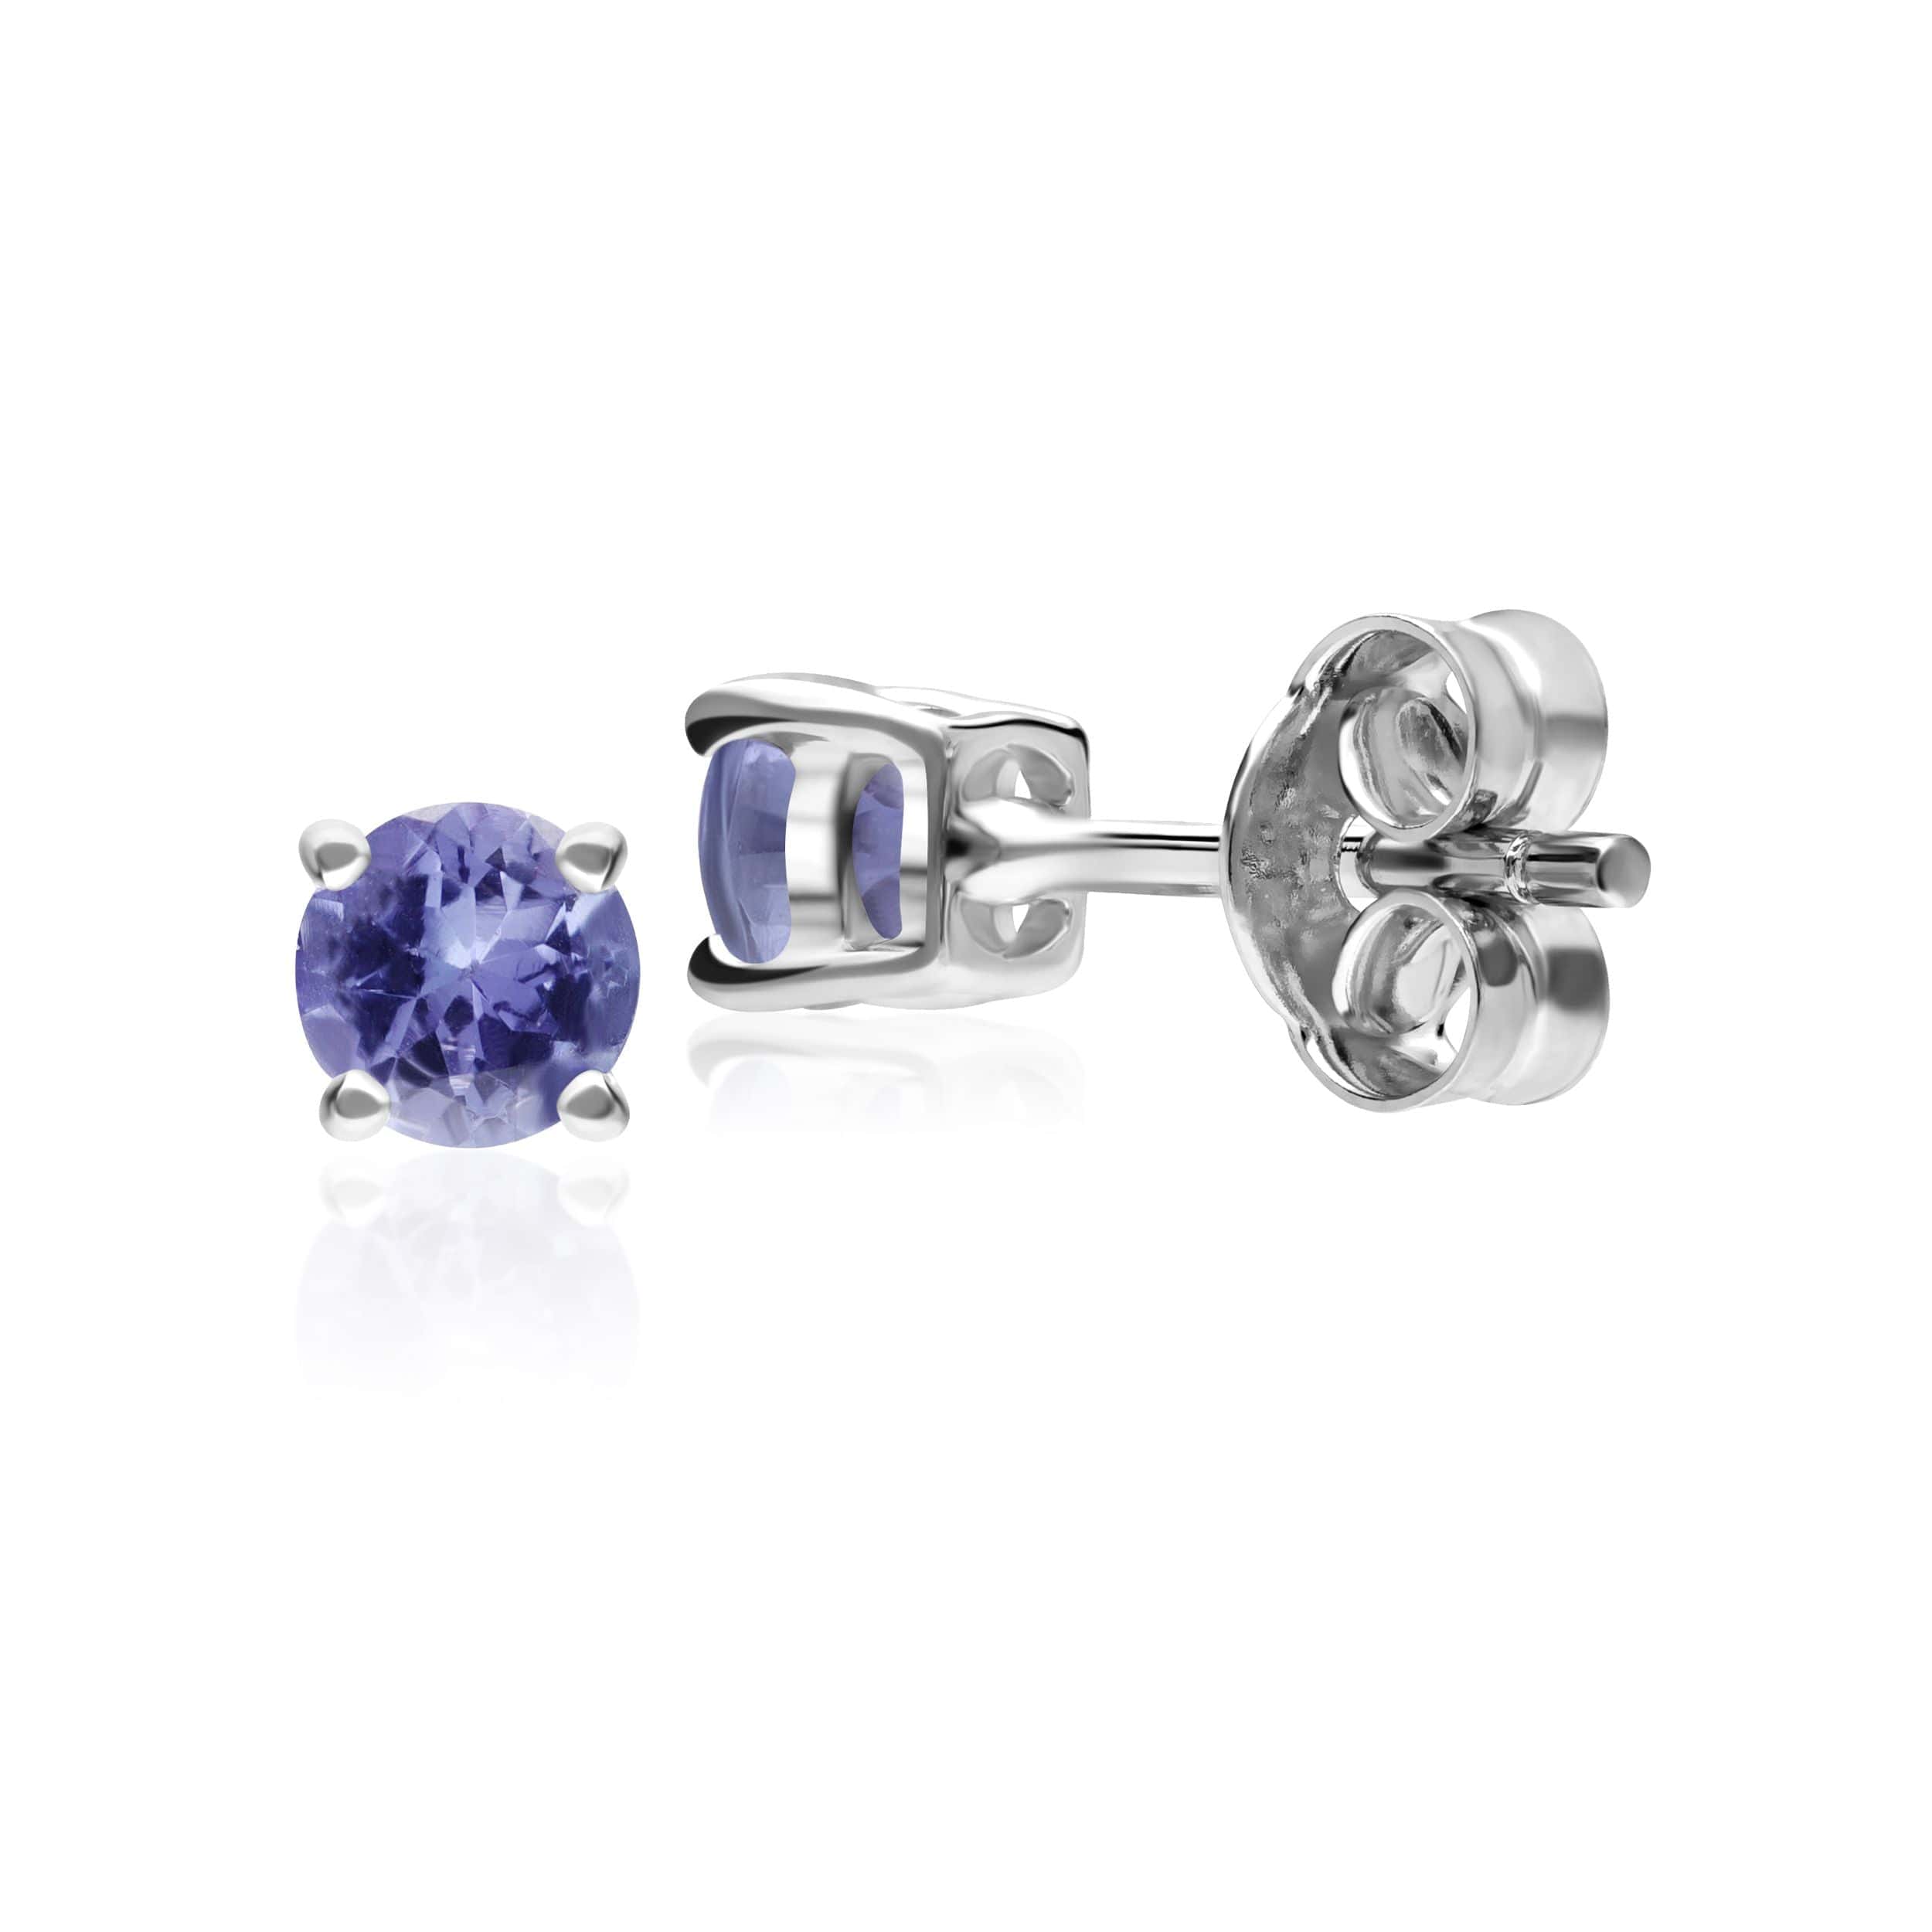 18937 Classic Round Tanzanite Stud Earrings in 9ct White Gold 2